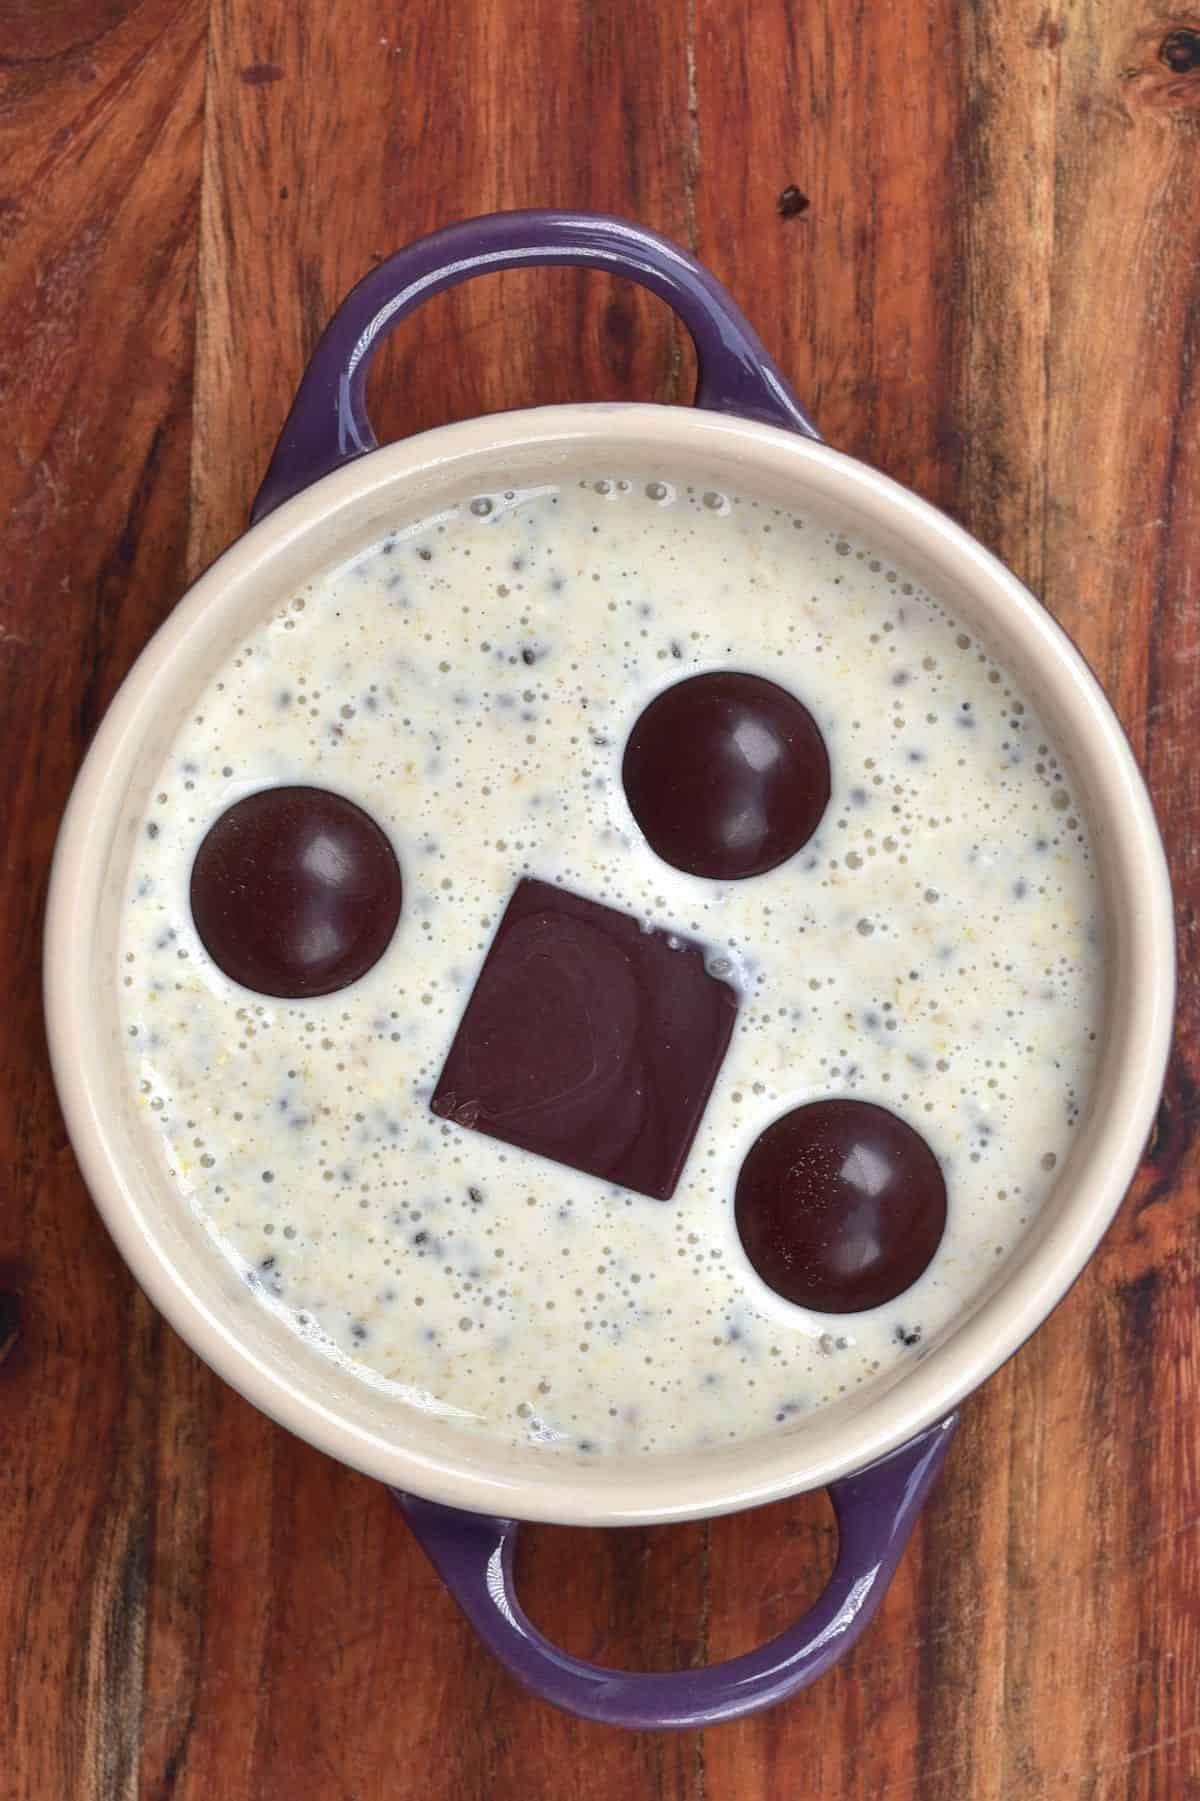 Batter for baked oats with chocolate in a ramekin